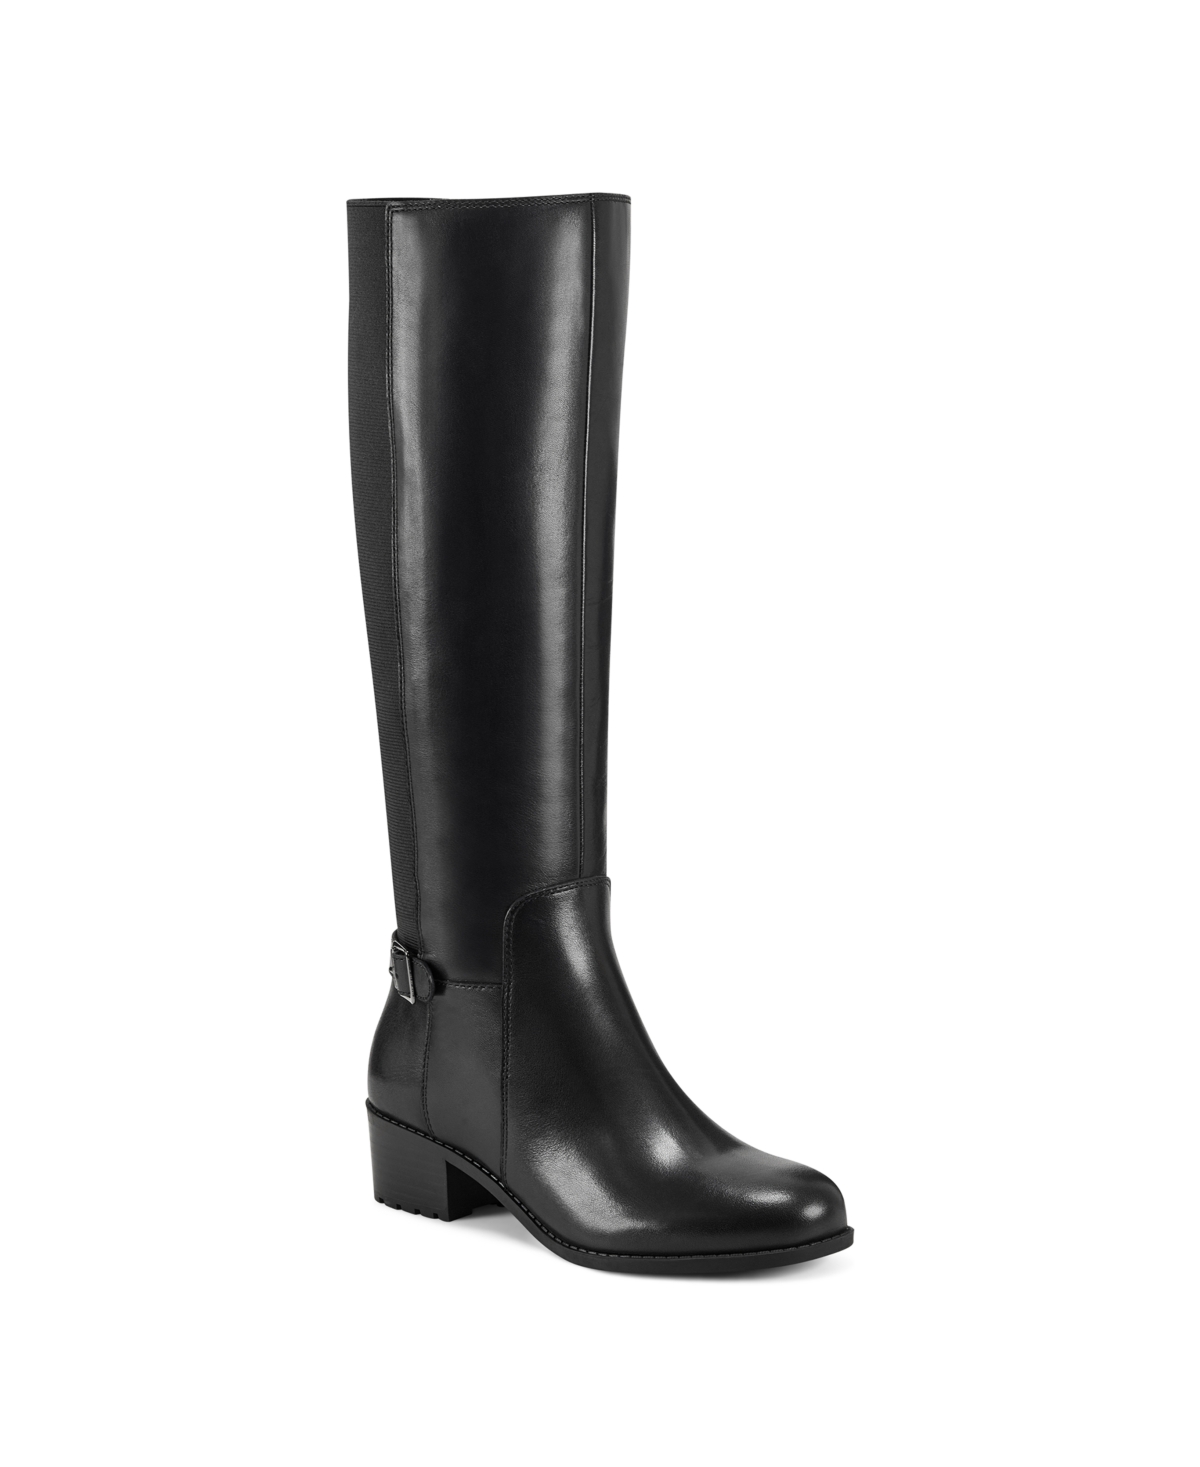 UPC 195608202335 product image for Easy Spirit Women's Chaza Tall Regular Calf Boots Women's Shoes | upcitemdb.com